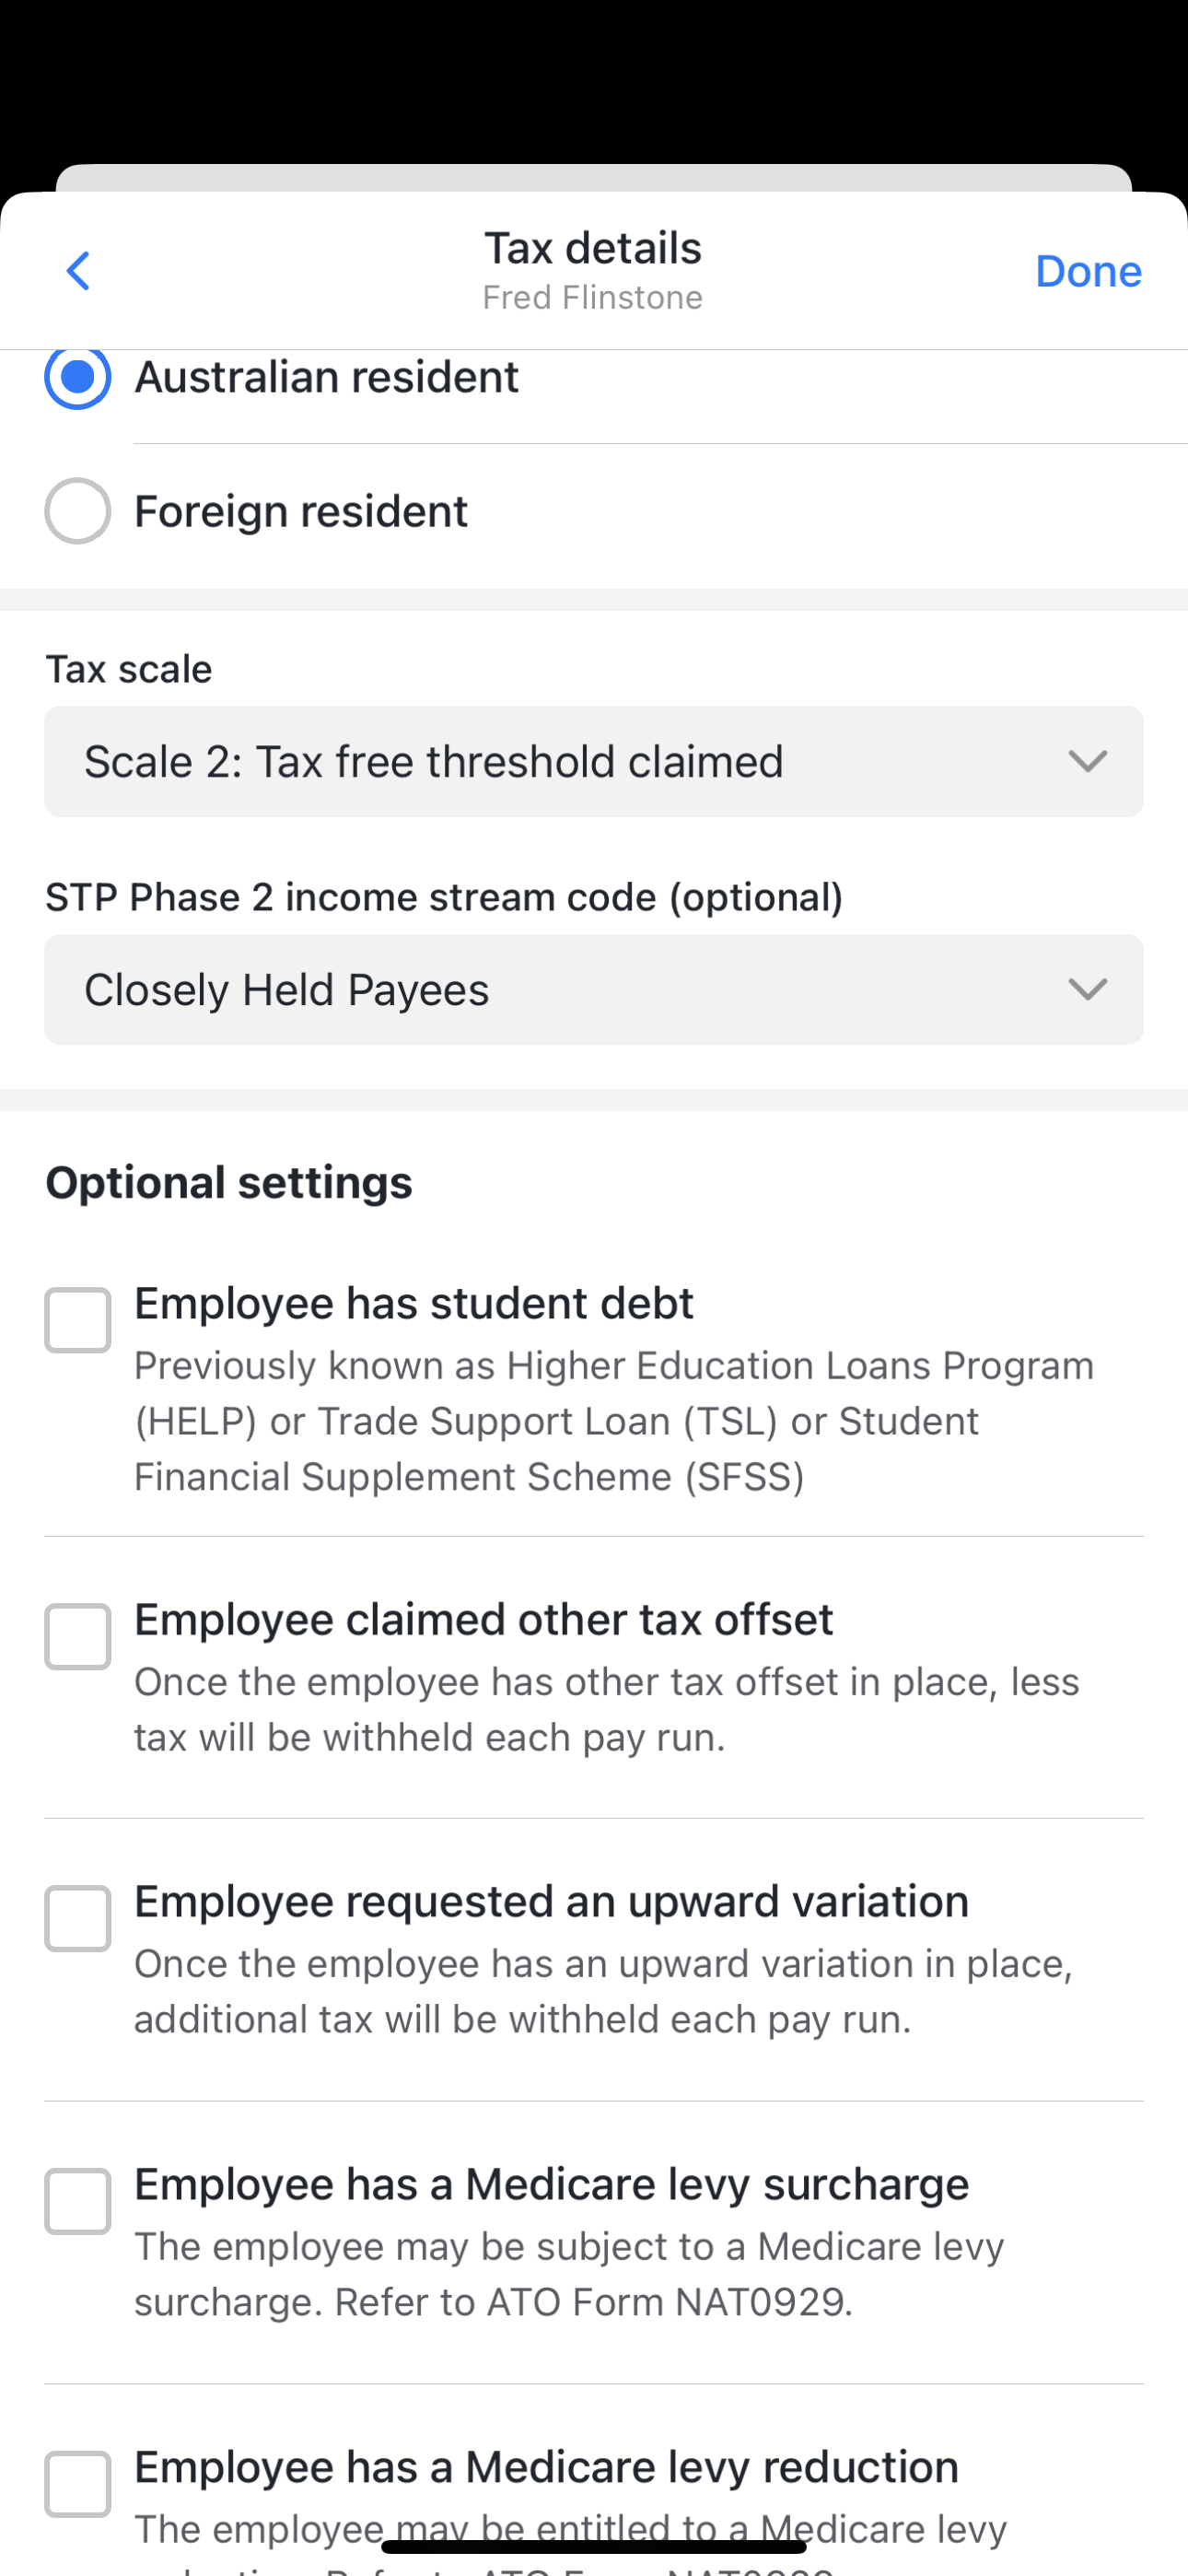 STP Phase 2 income stream code selected